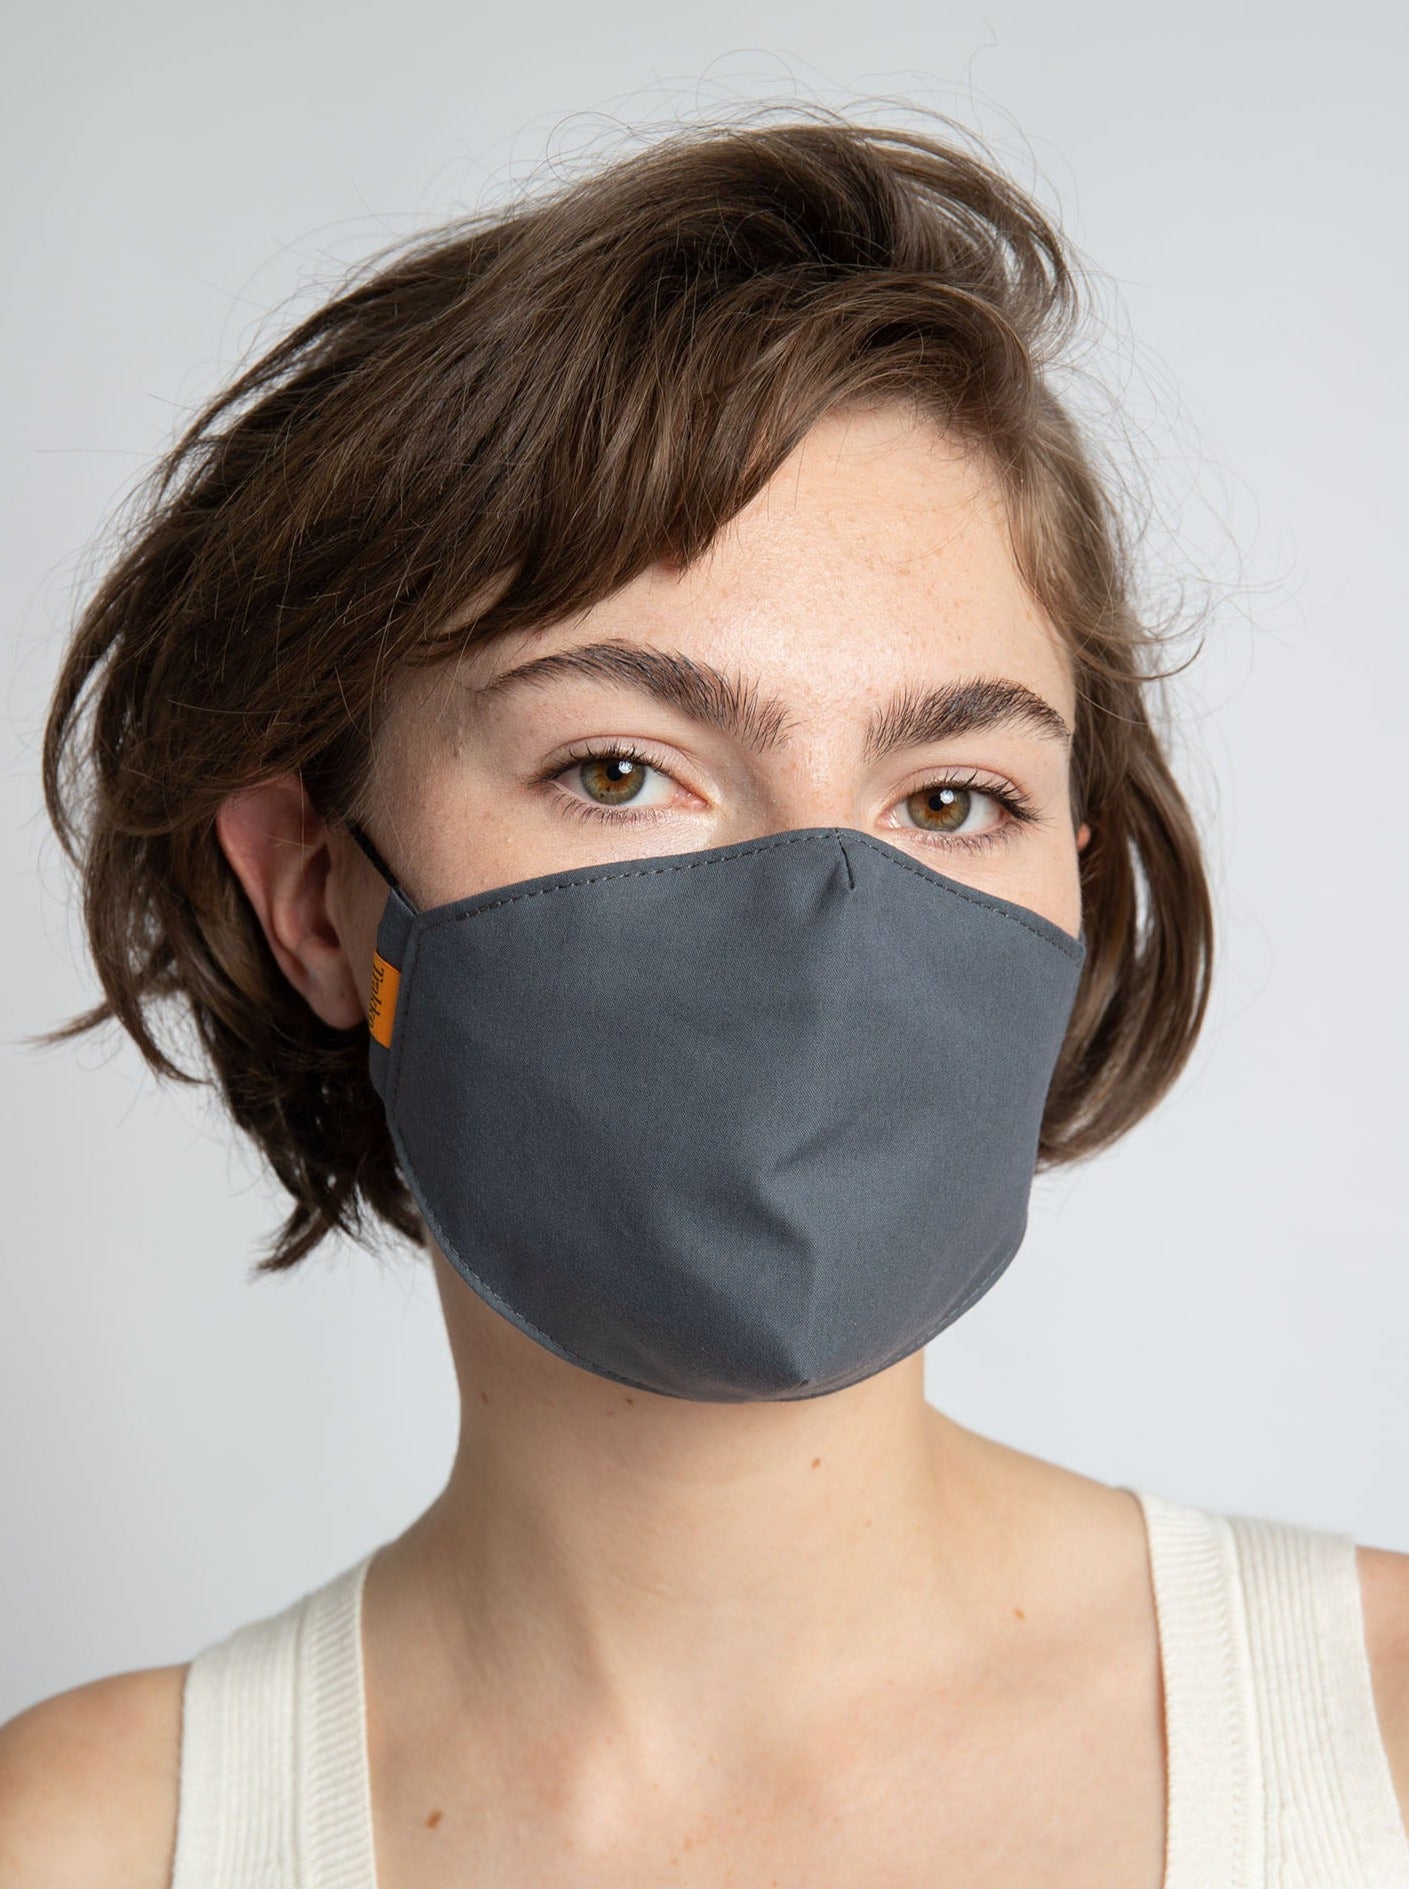 Picture of woman wearing a Trakke Face Mask in Grey - made of treated canvas with black elastic ear loops. Designed to fit disposable N95 air filters